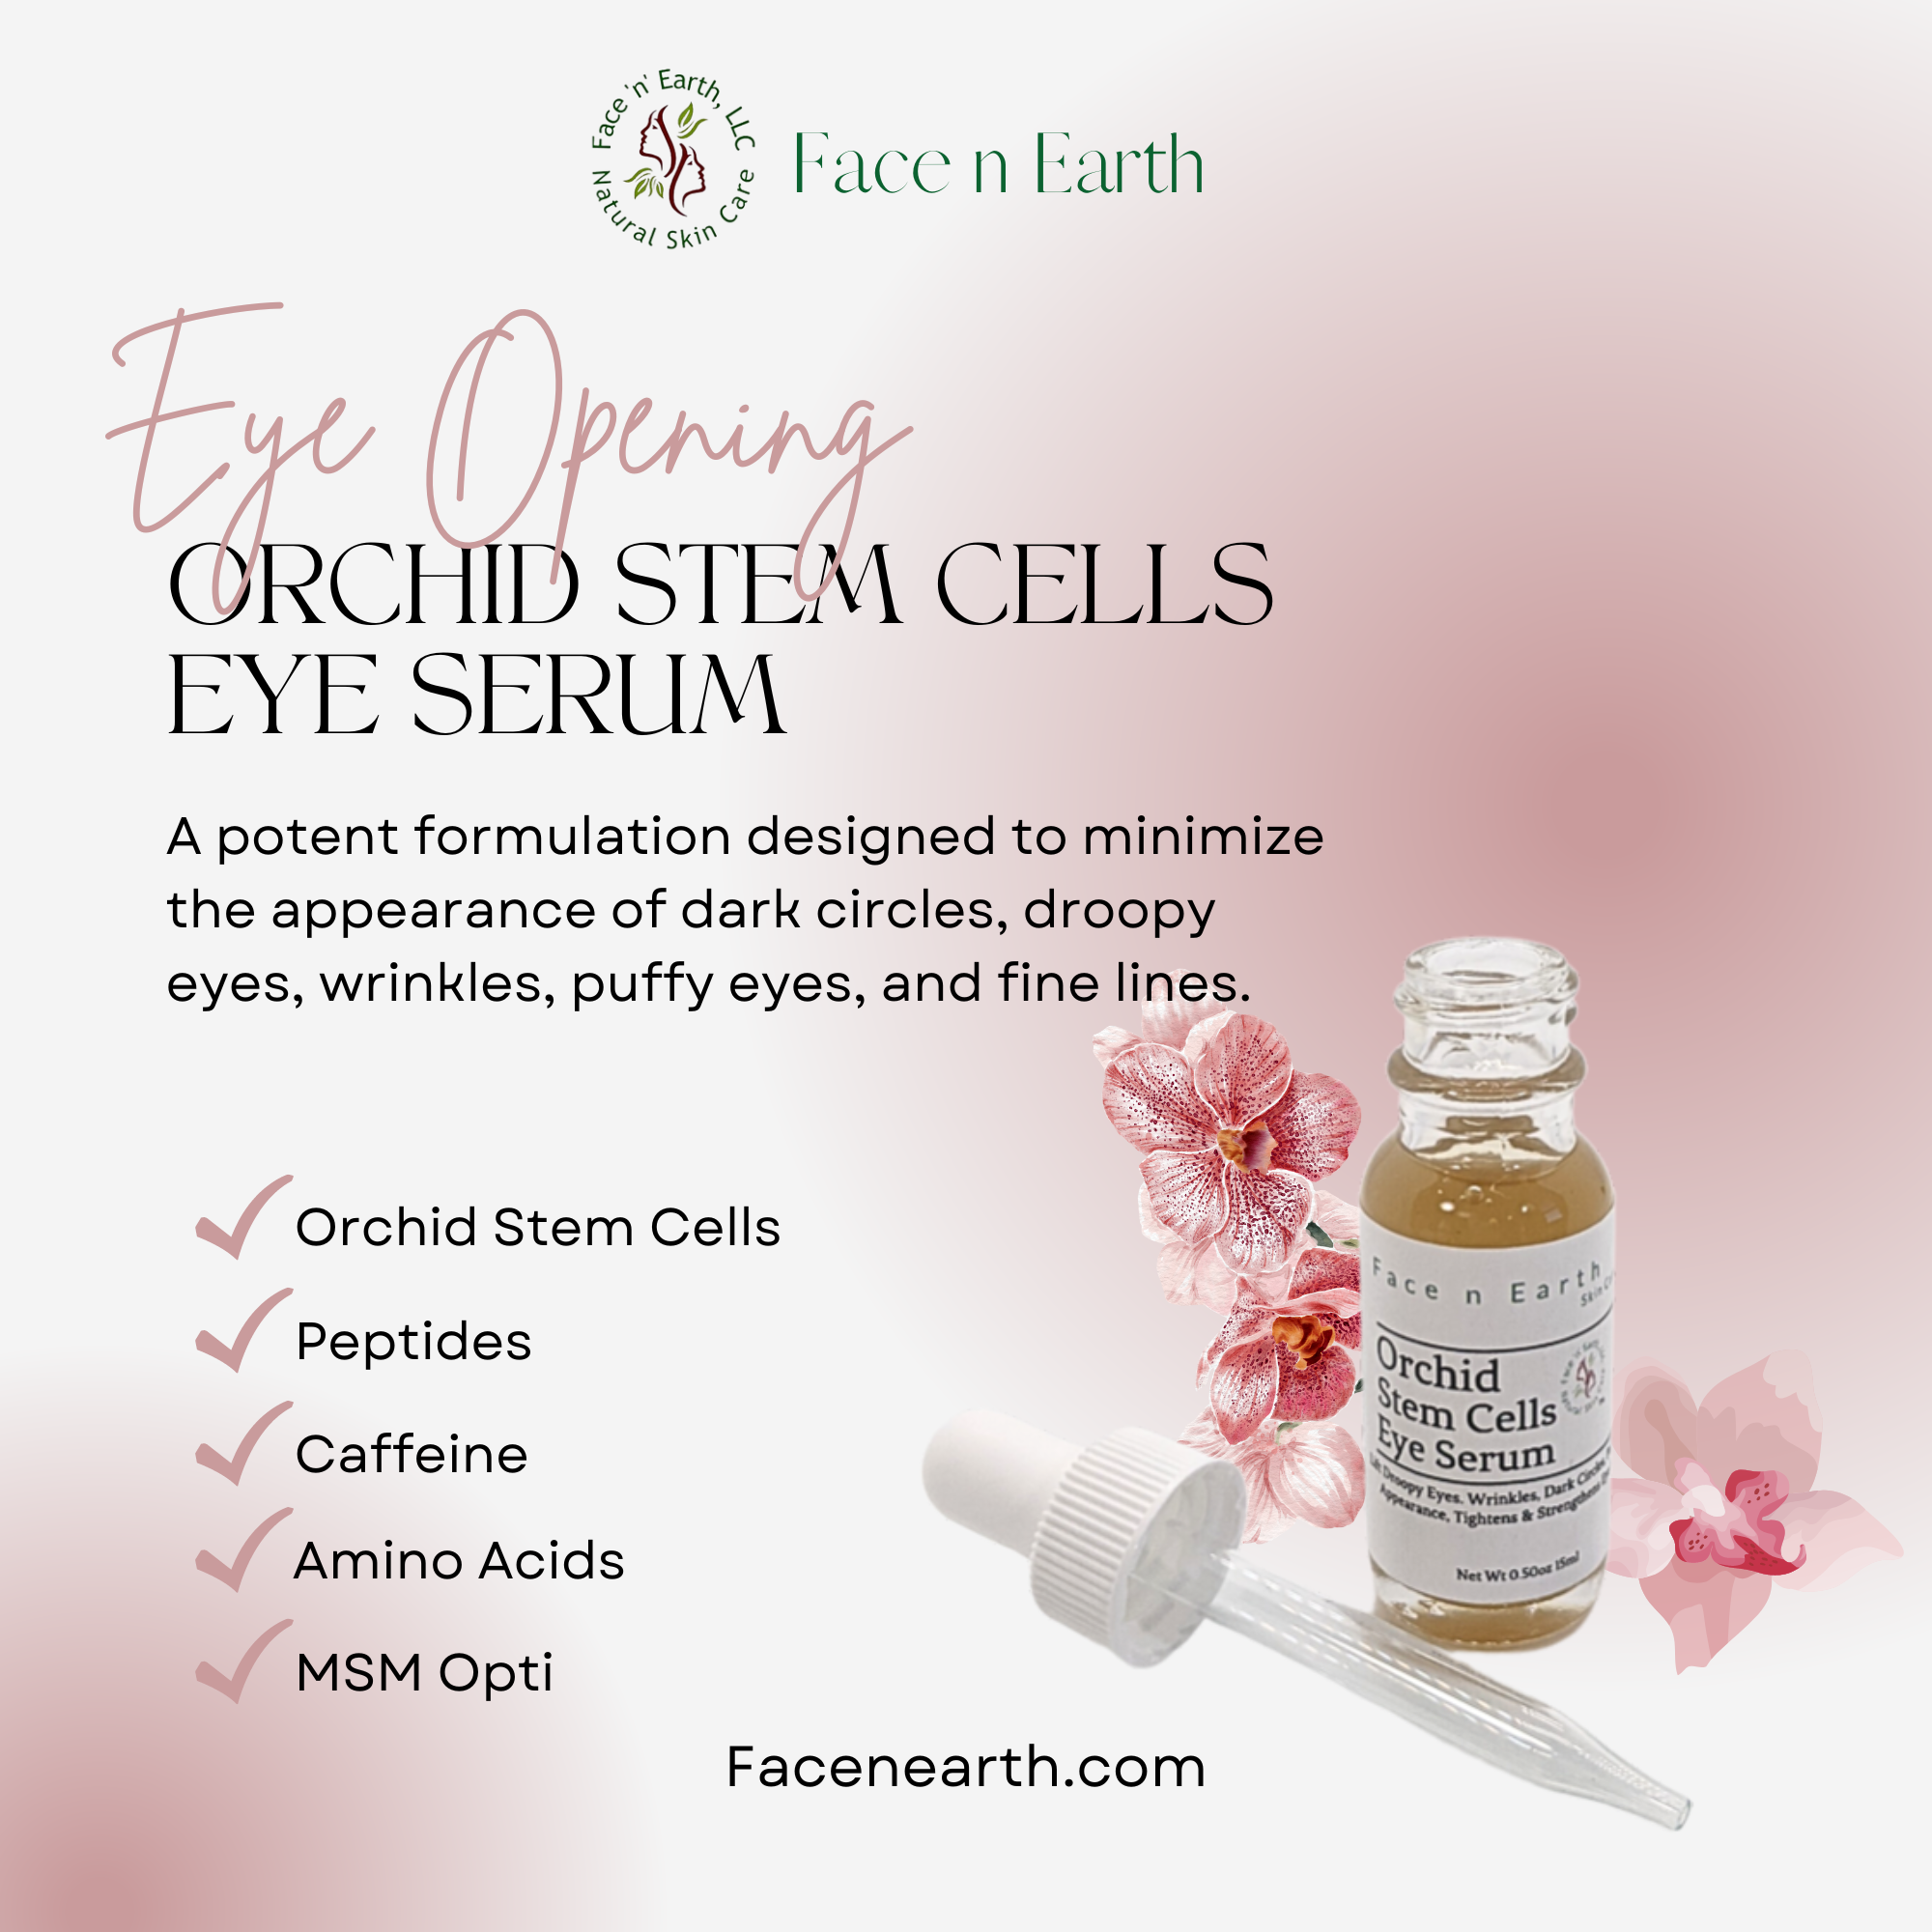 Orchid Stem Cells & Peptides Eye Serum - SPECIAL PRICE